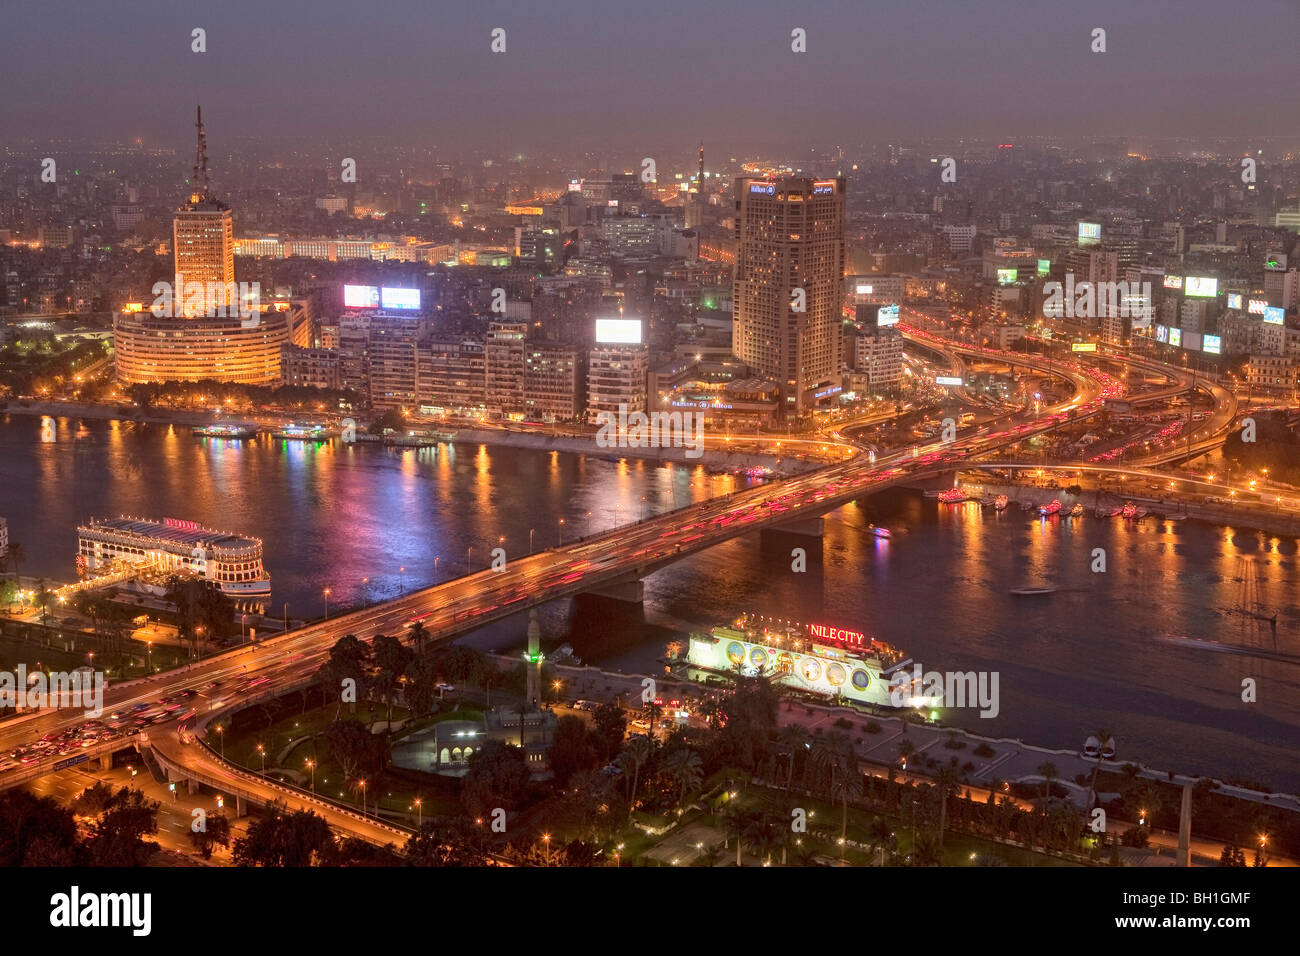 View at the Nile and Zamalek district on the island of Gezira in the evening, Cairo, Egypt, Africa Stock Photo